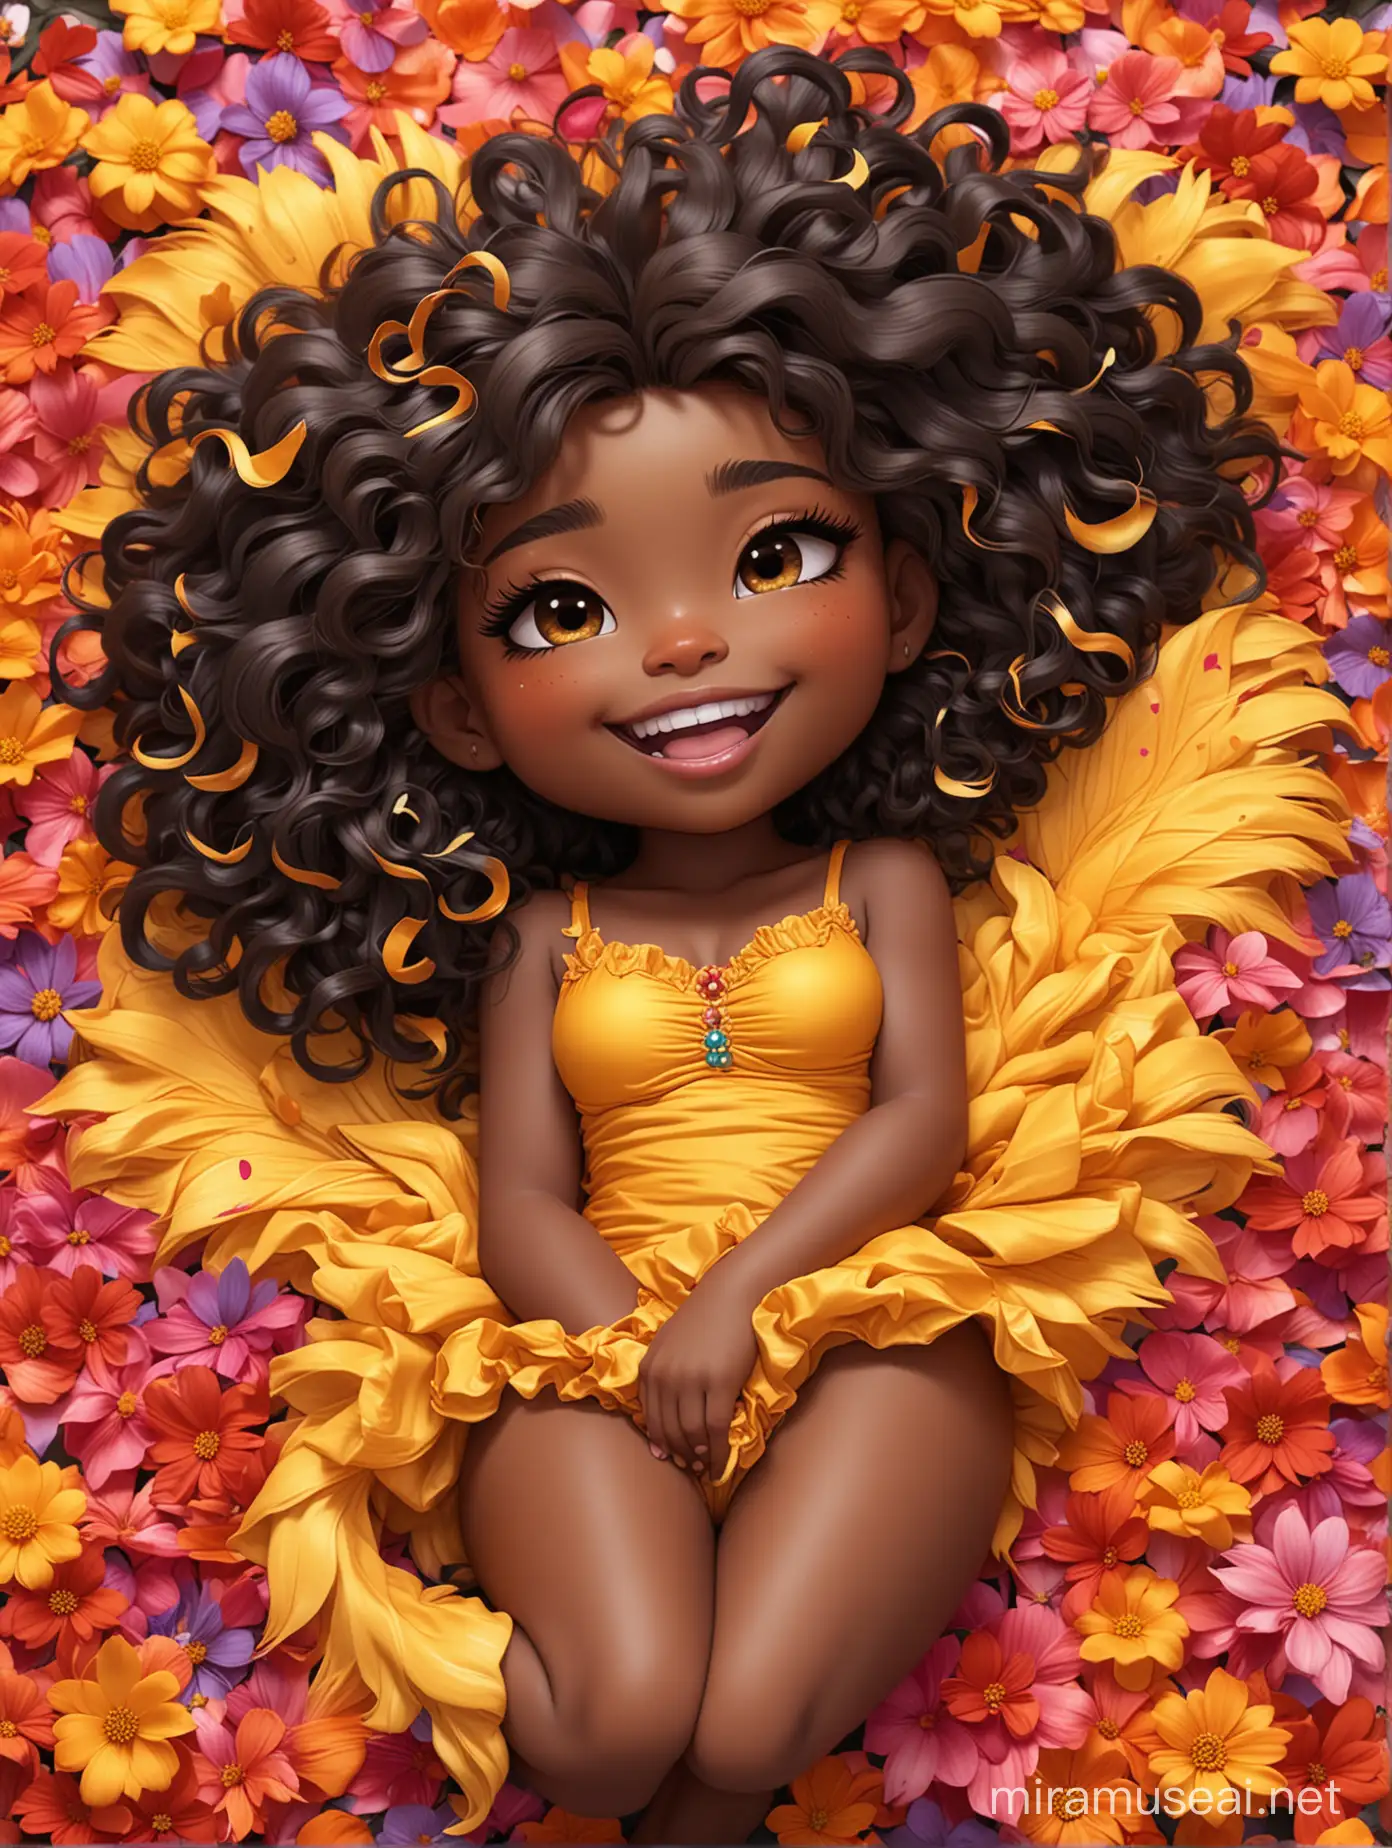 A sassy thick-lined expressionism cartoon black chibi girl lounging lazily on her side, surrounded by colorful flower petals. She has a golden lion tail curling playfully behind her curvy body. Looking up coyly, she grins widely, showing teeth. Her poofy hair forms a mane framing her confident, regal expression.